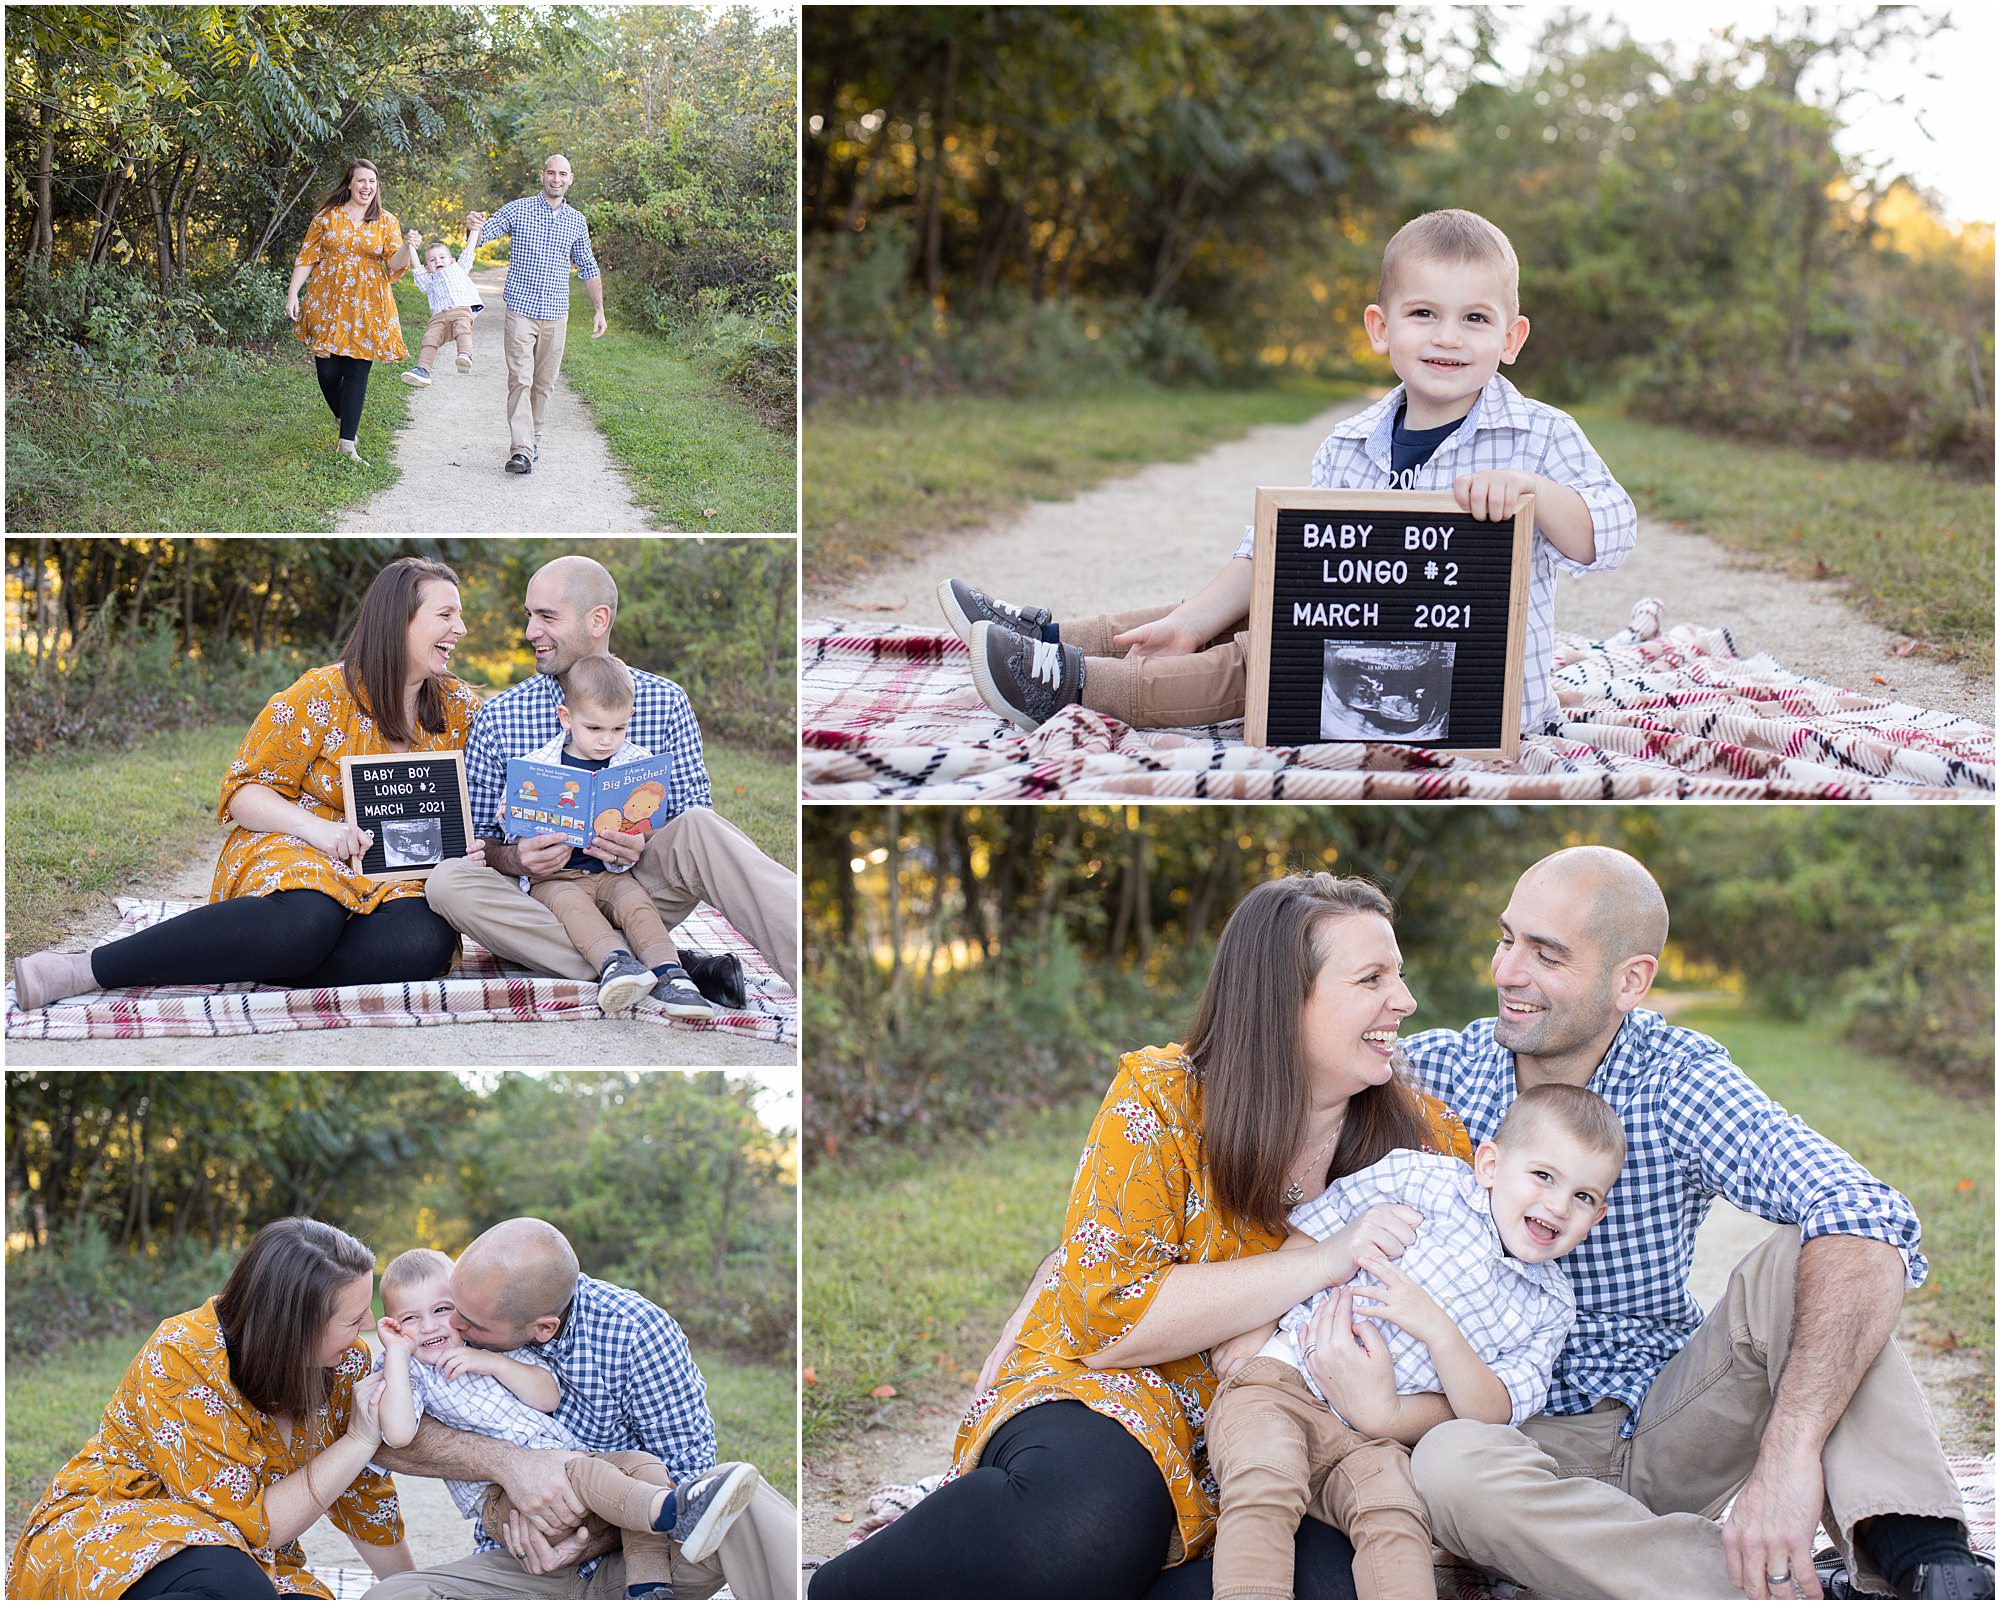 A pregnancy announcement at a family's South Jersey holiday family photo sessions